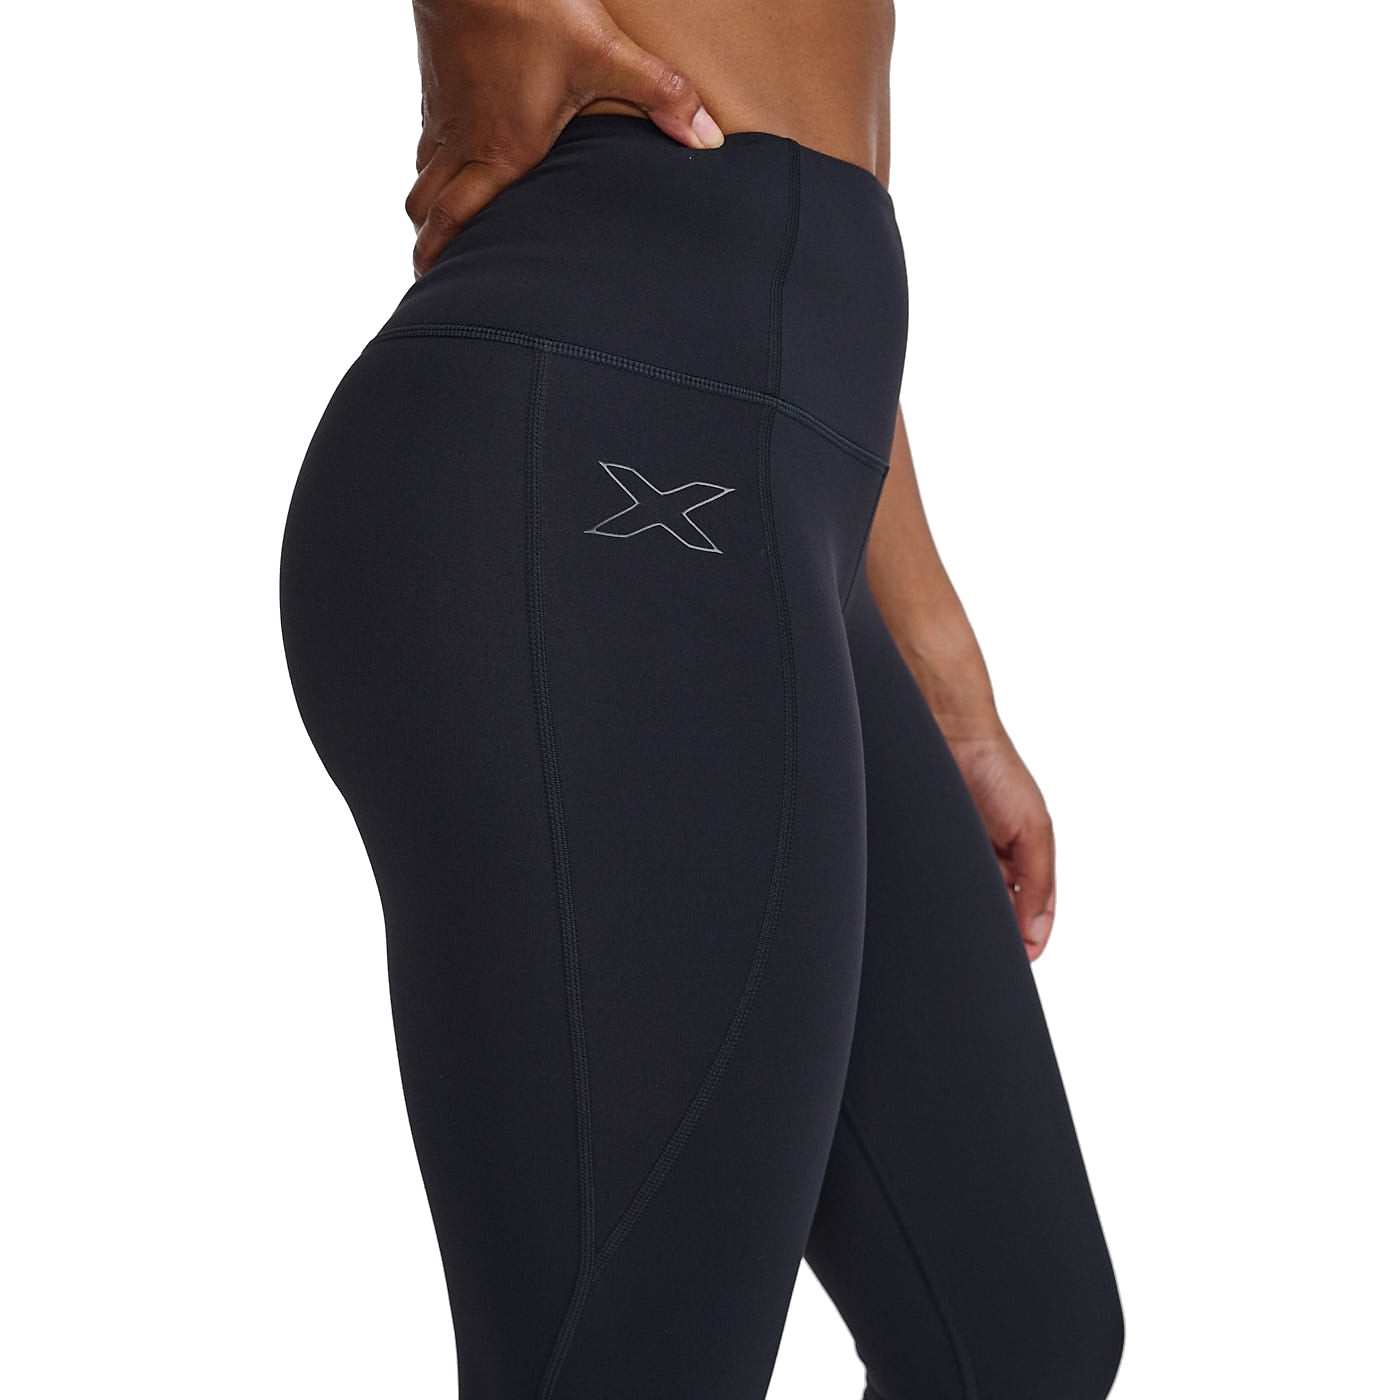 Buy 2XU Women Bonded Mid-Rise 3/4 Compression Tights online from GRIT+TONIC  in UAE